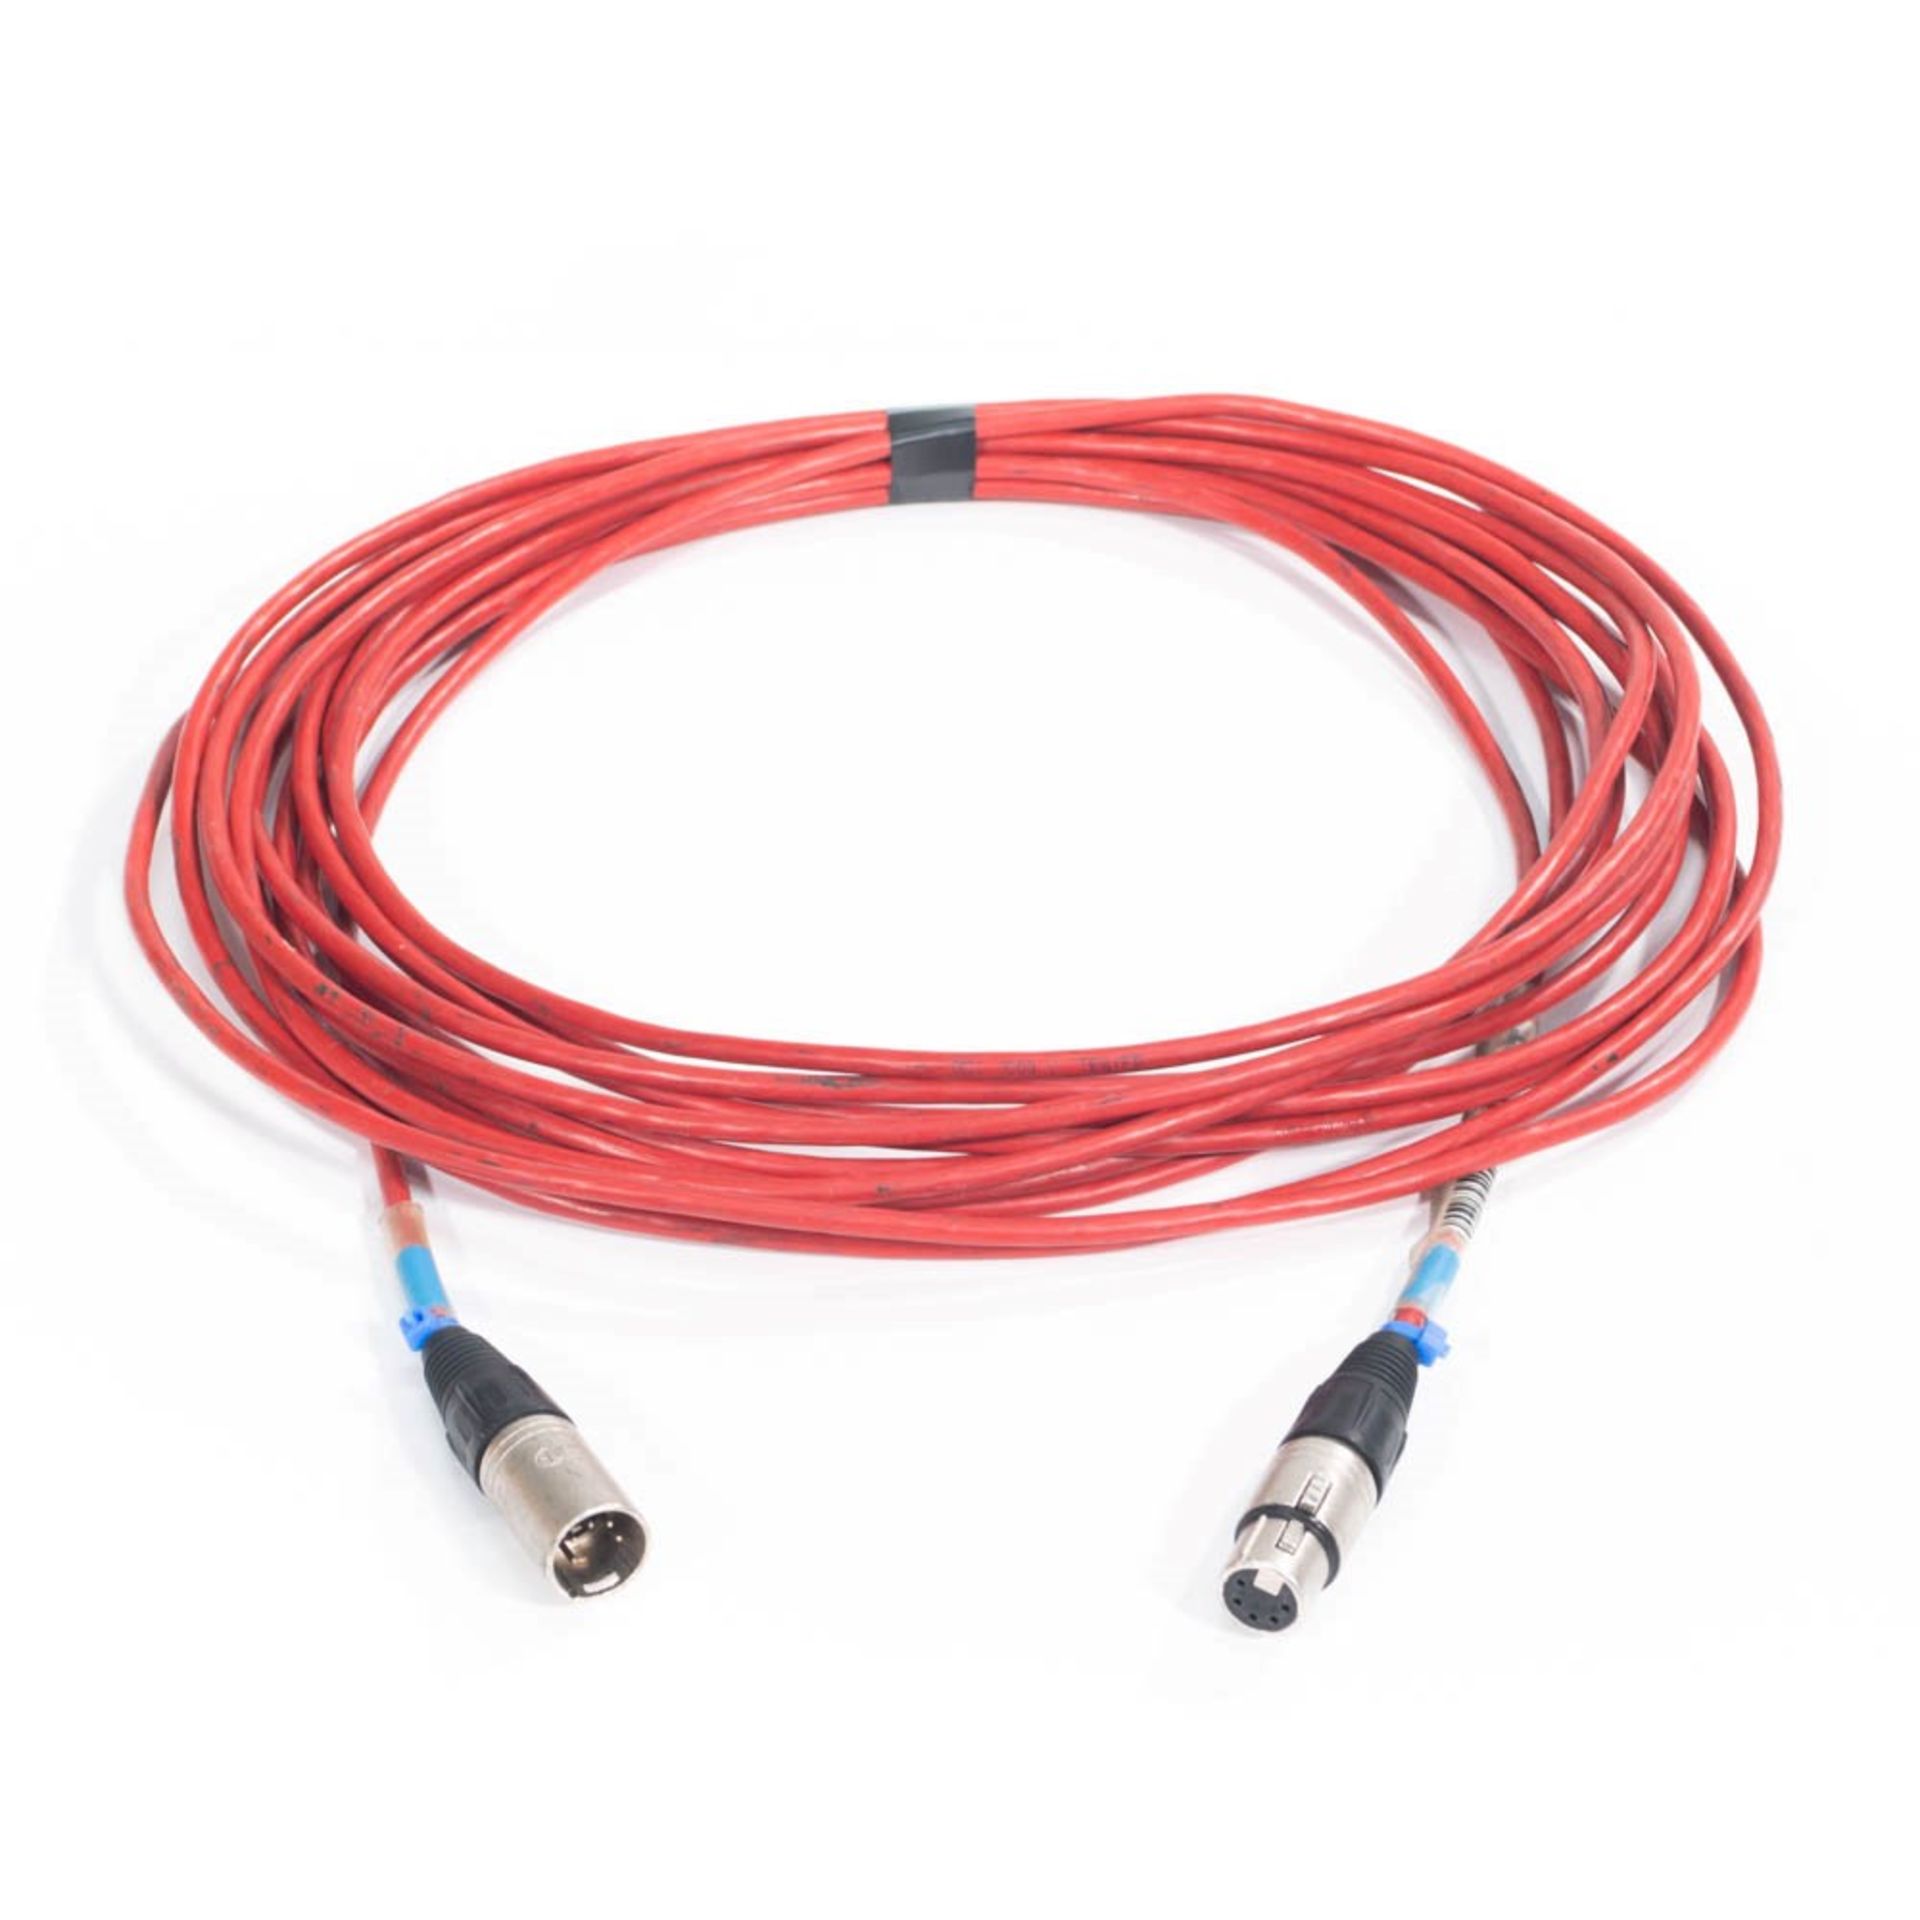 10 x DMX 10-Metre, 5-Pin Cables In RED - New / Unused Stock - Ref: 531 - CL581 - Location: